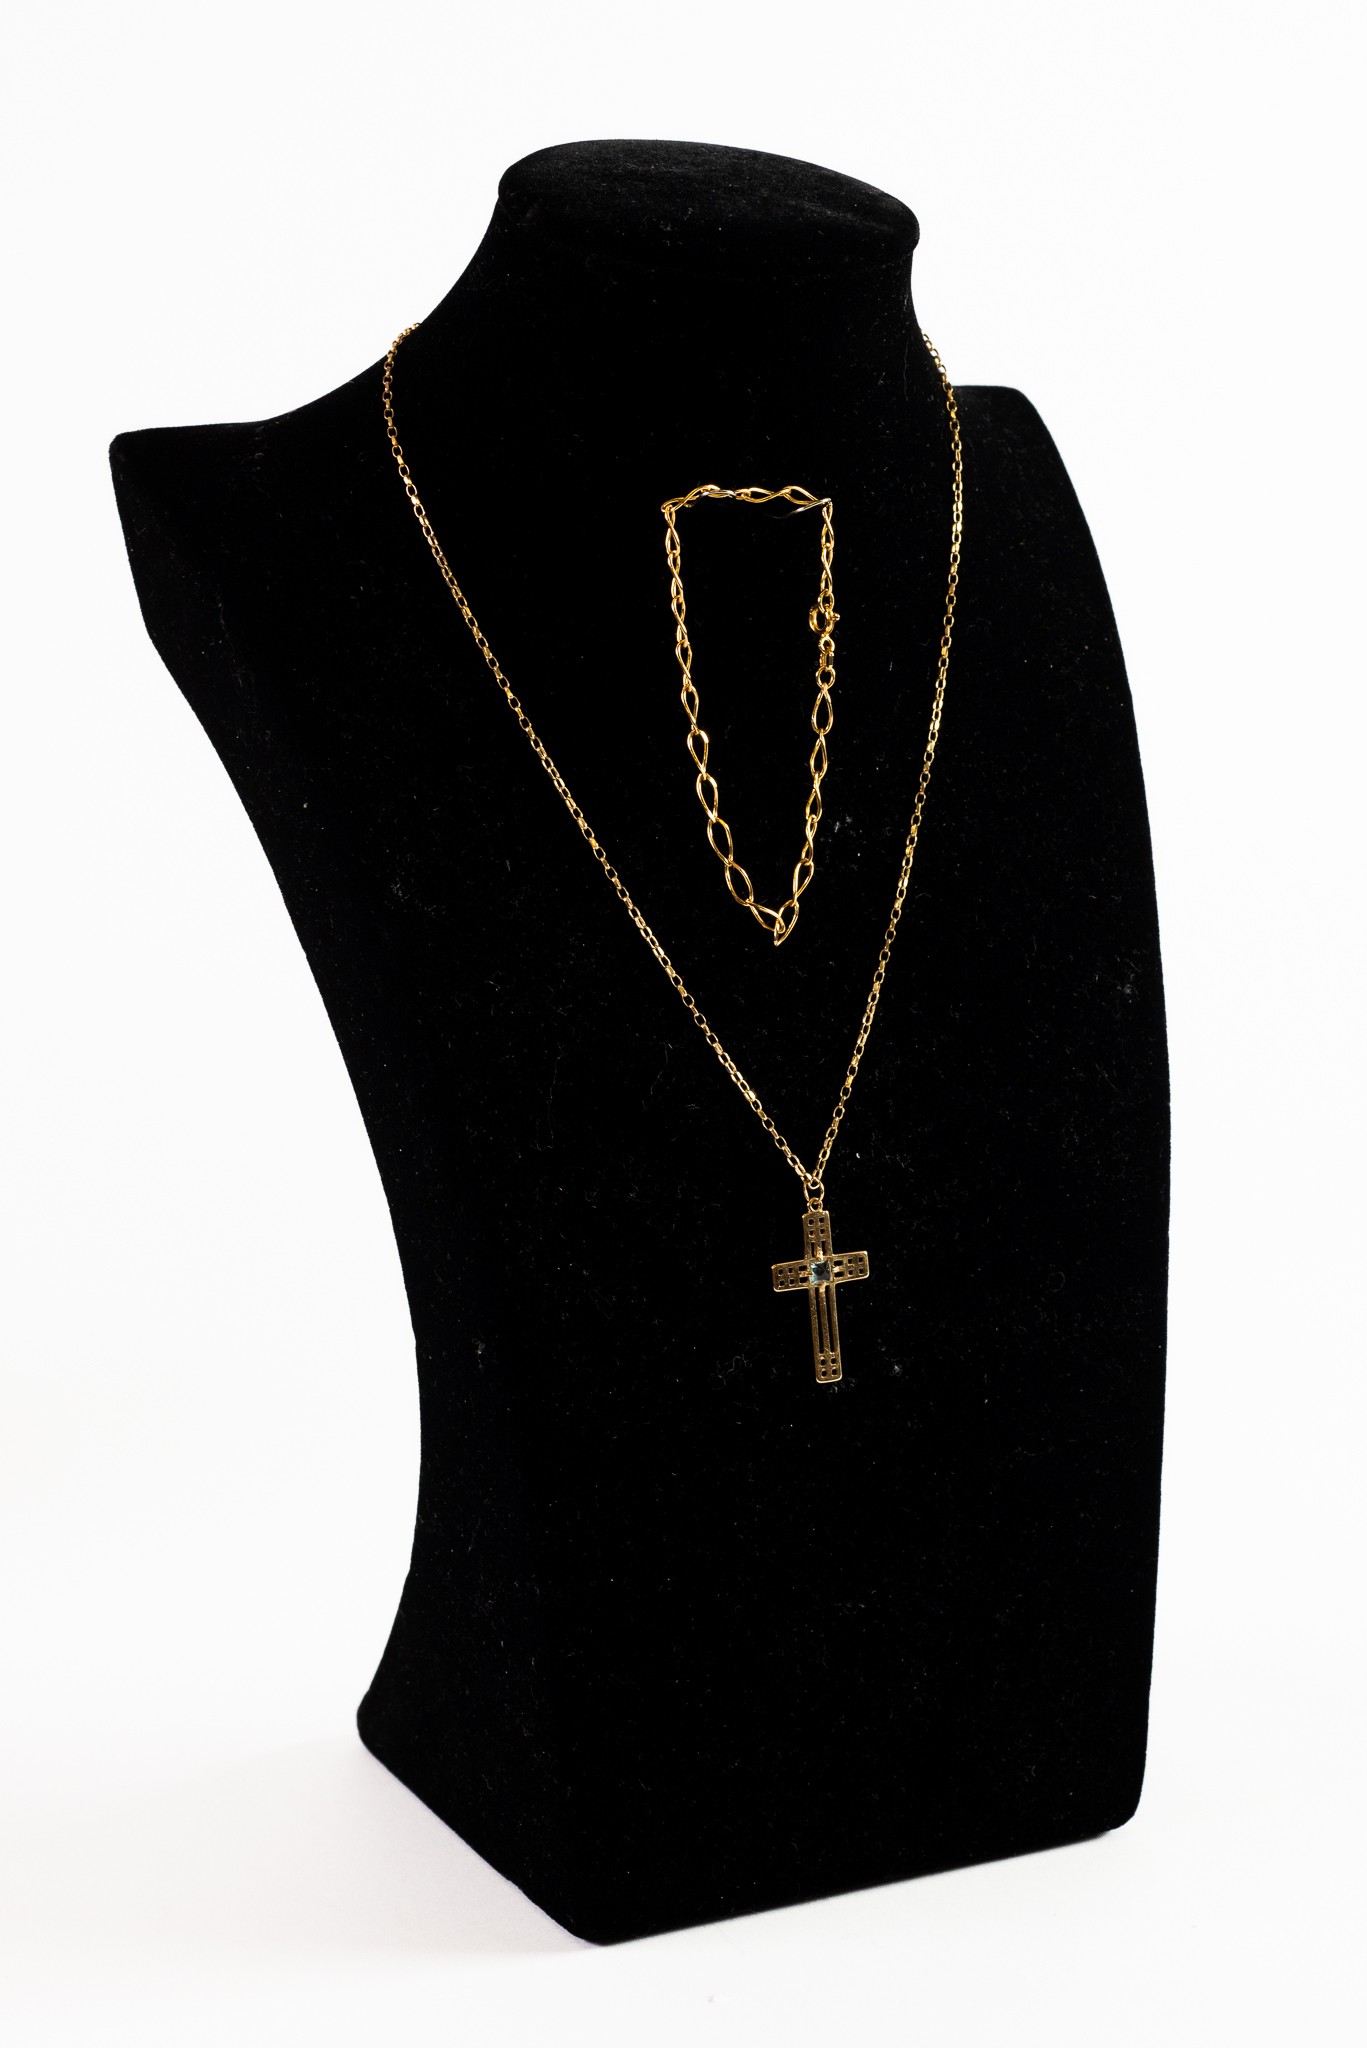 9ct GOLD FINE CHAIN NECKLACE, with ring clasp, 18in (46cm) long, the 9ct GOLD CROSS PENDANT, set